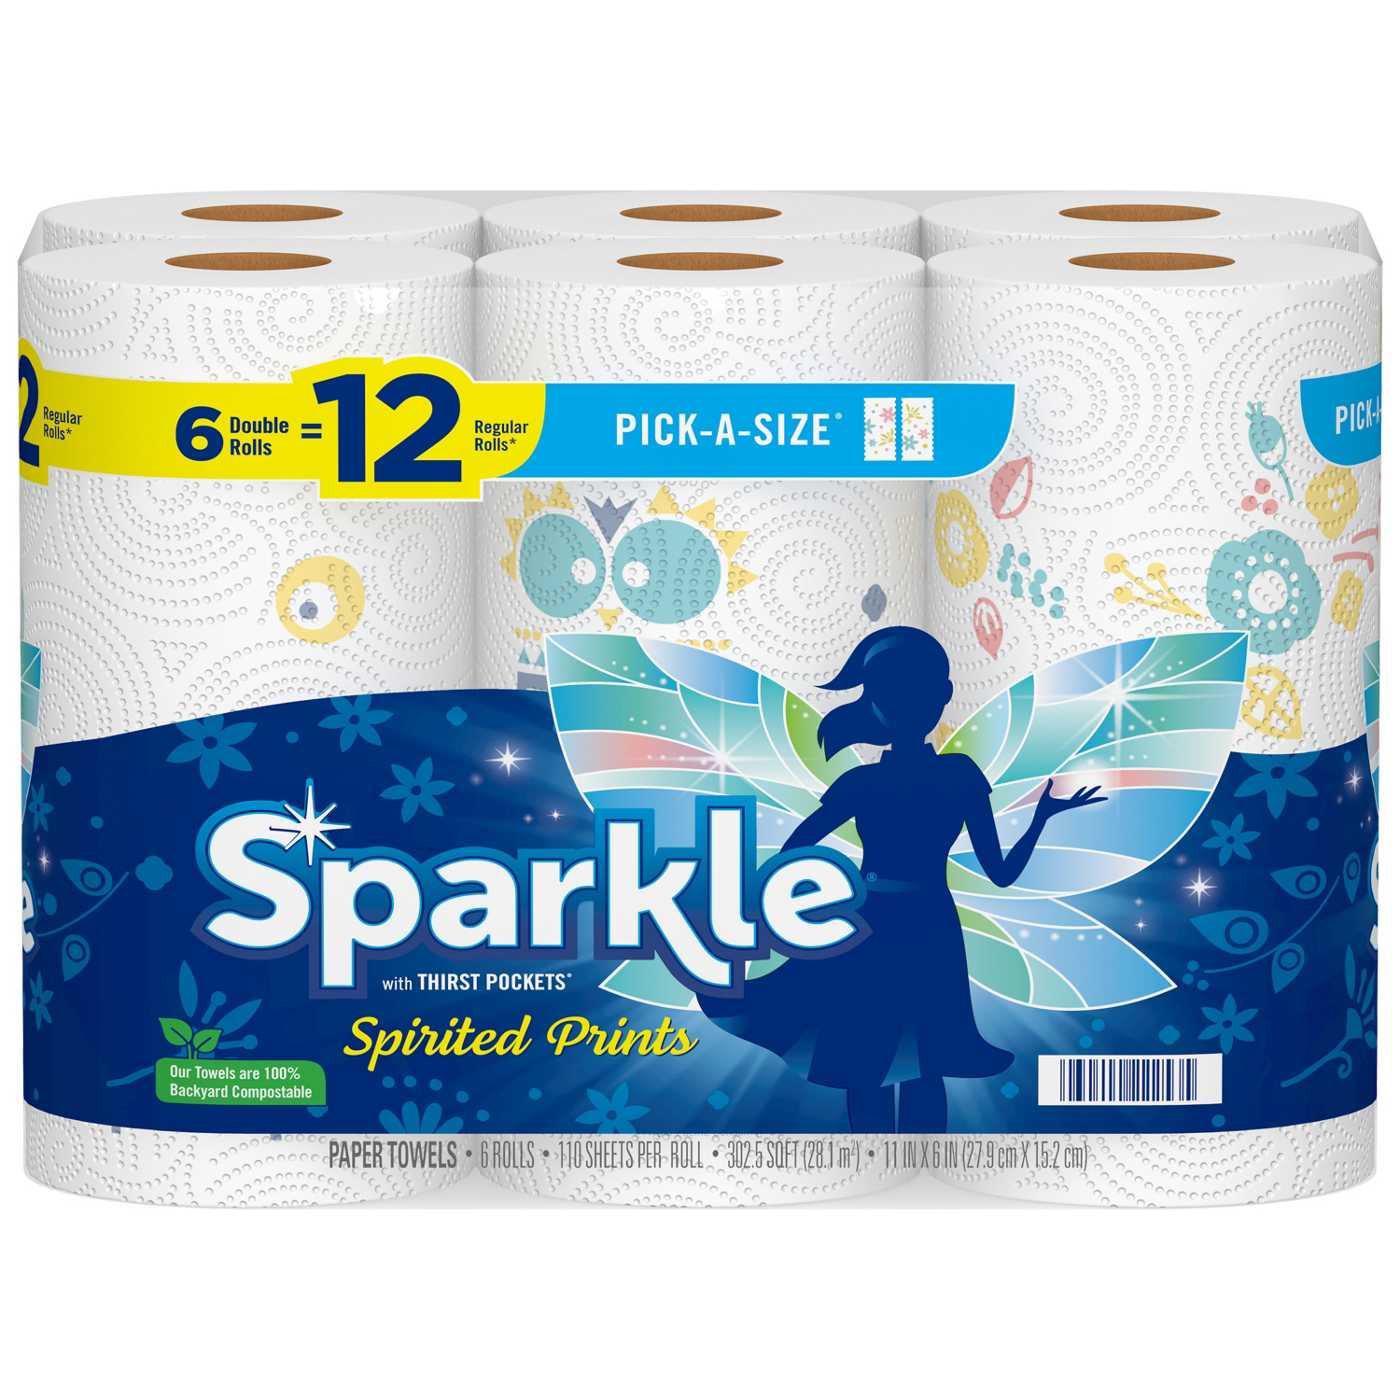 Sparkle Pick-A-Size Double Rolls Paper Towels with Thirst Pockets - Spirited Prints; image 1 of 2